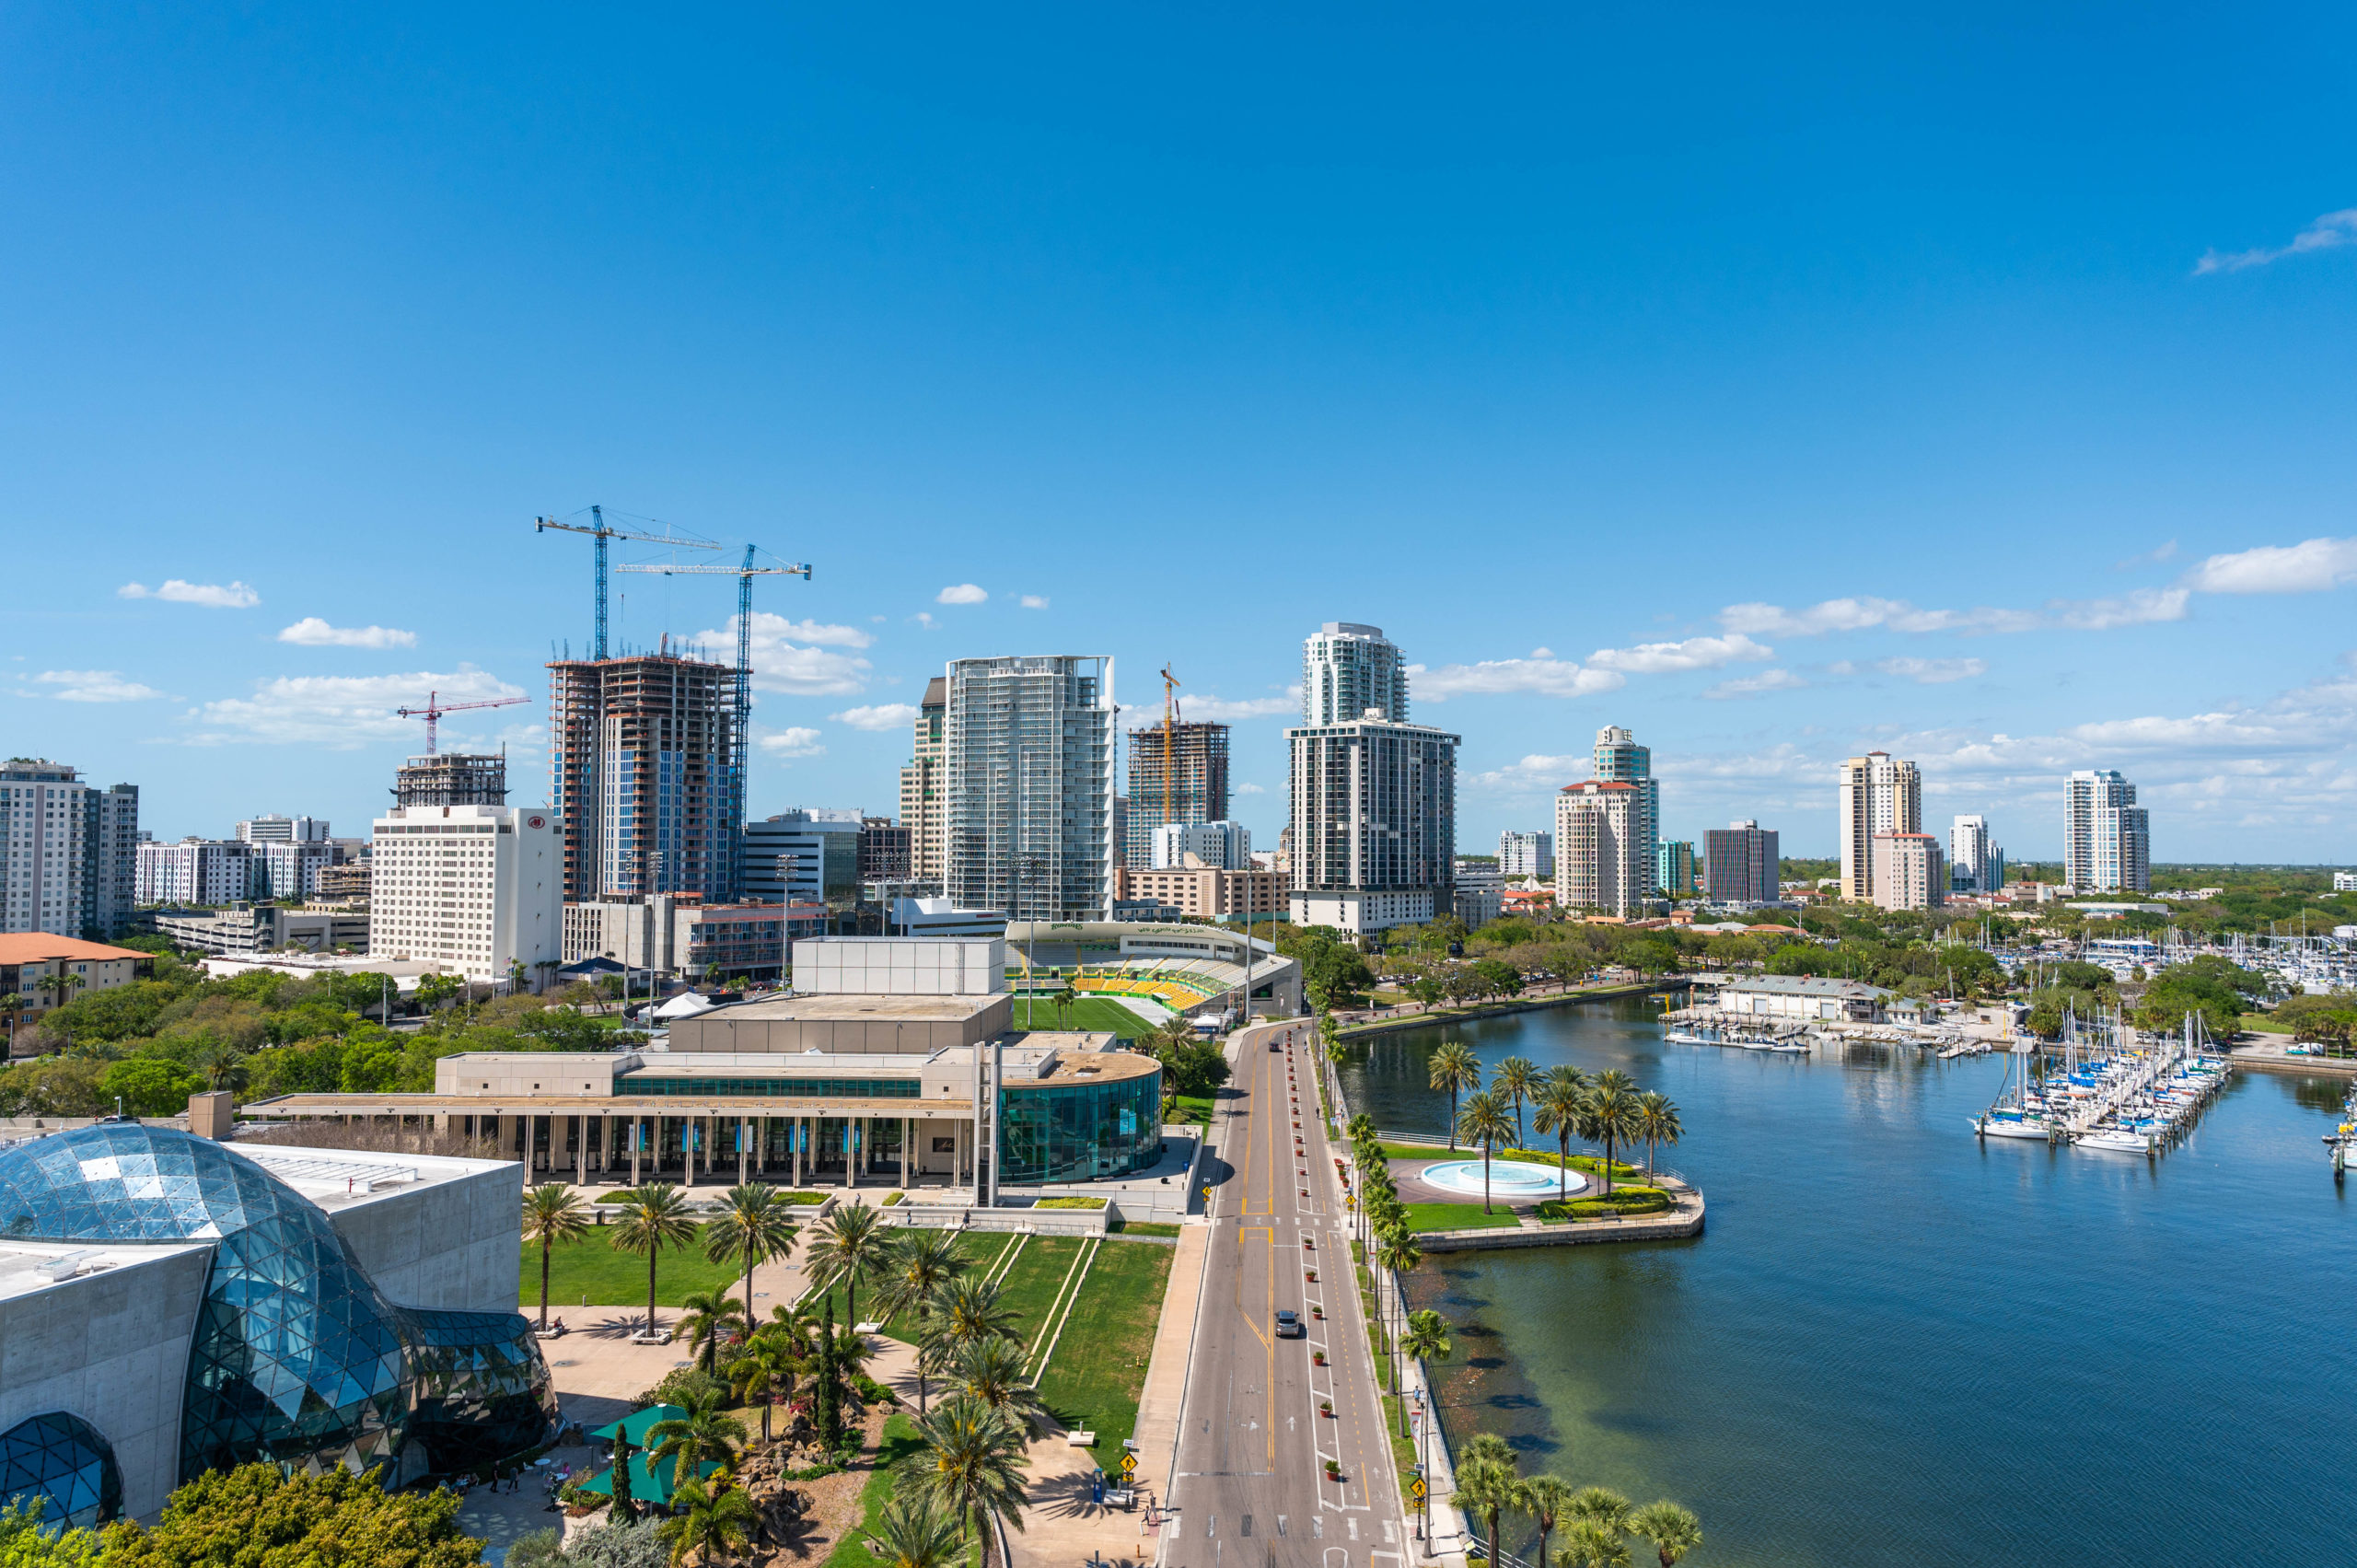 Image of an aerial view of Downtown St. Petersburg, including the Dali Museum, the Mahaffey Theater, the Al Lang Stadium, and various residential towers and commercial office buildings, hotels, and the marina. 